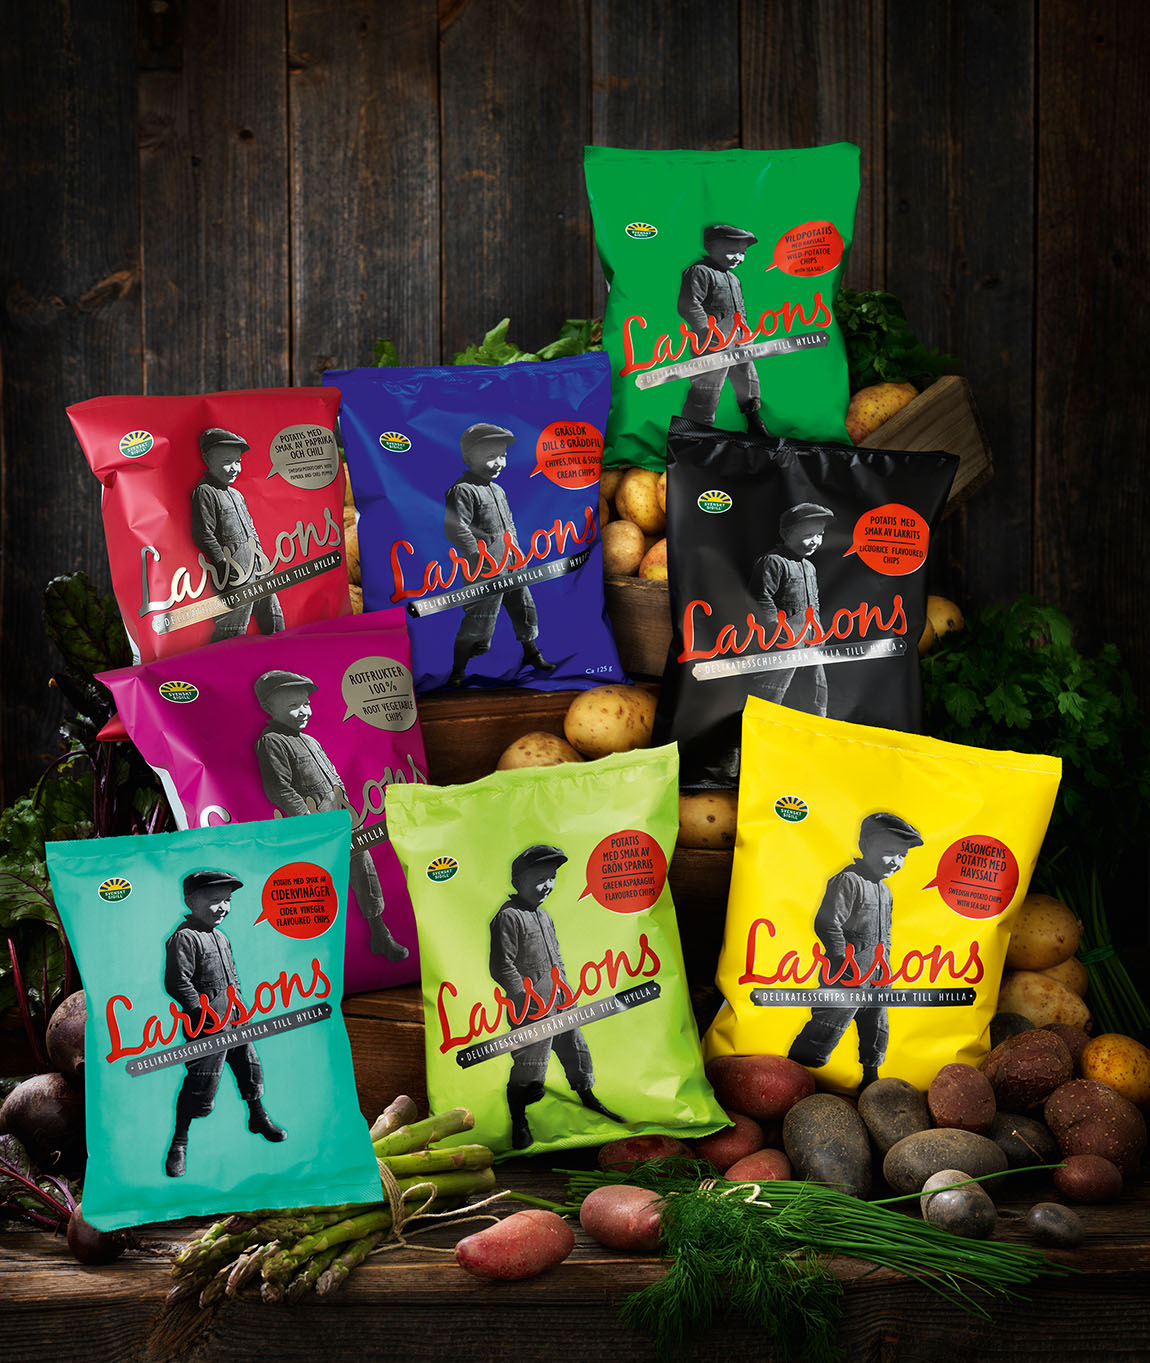 Larssons: Your favourite crisps – more than just a snack